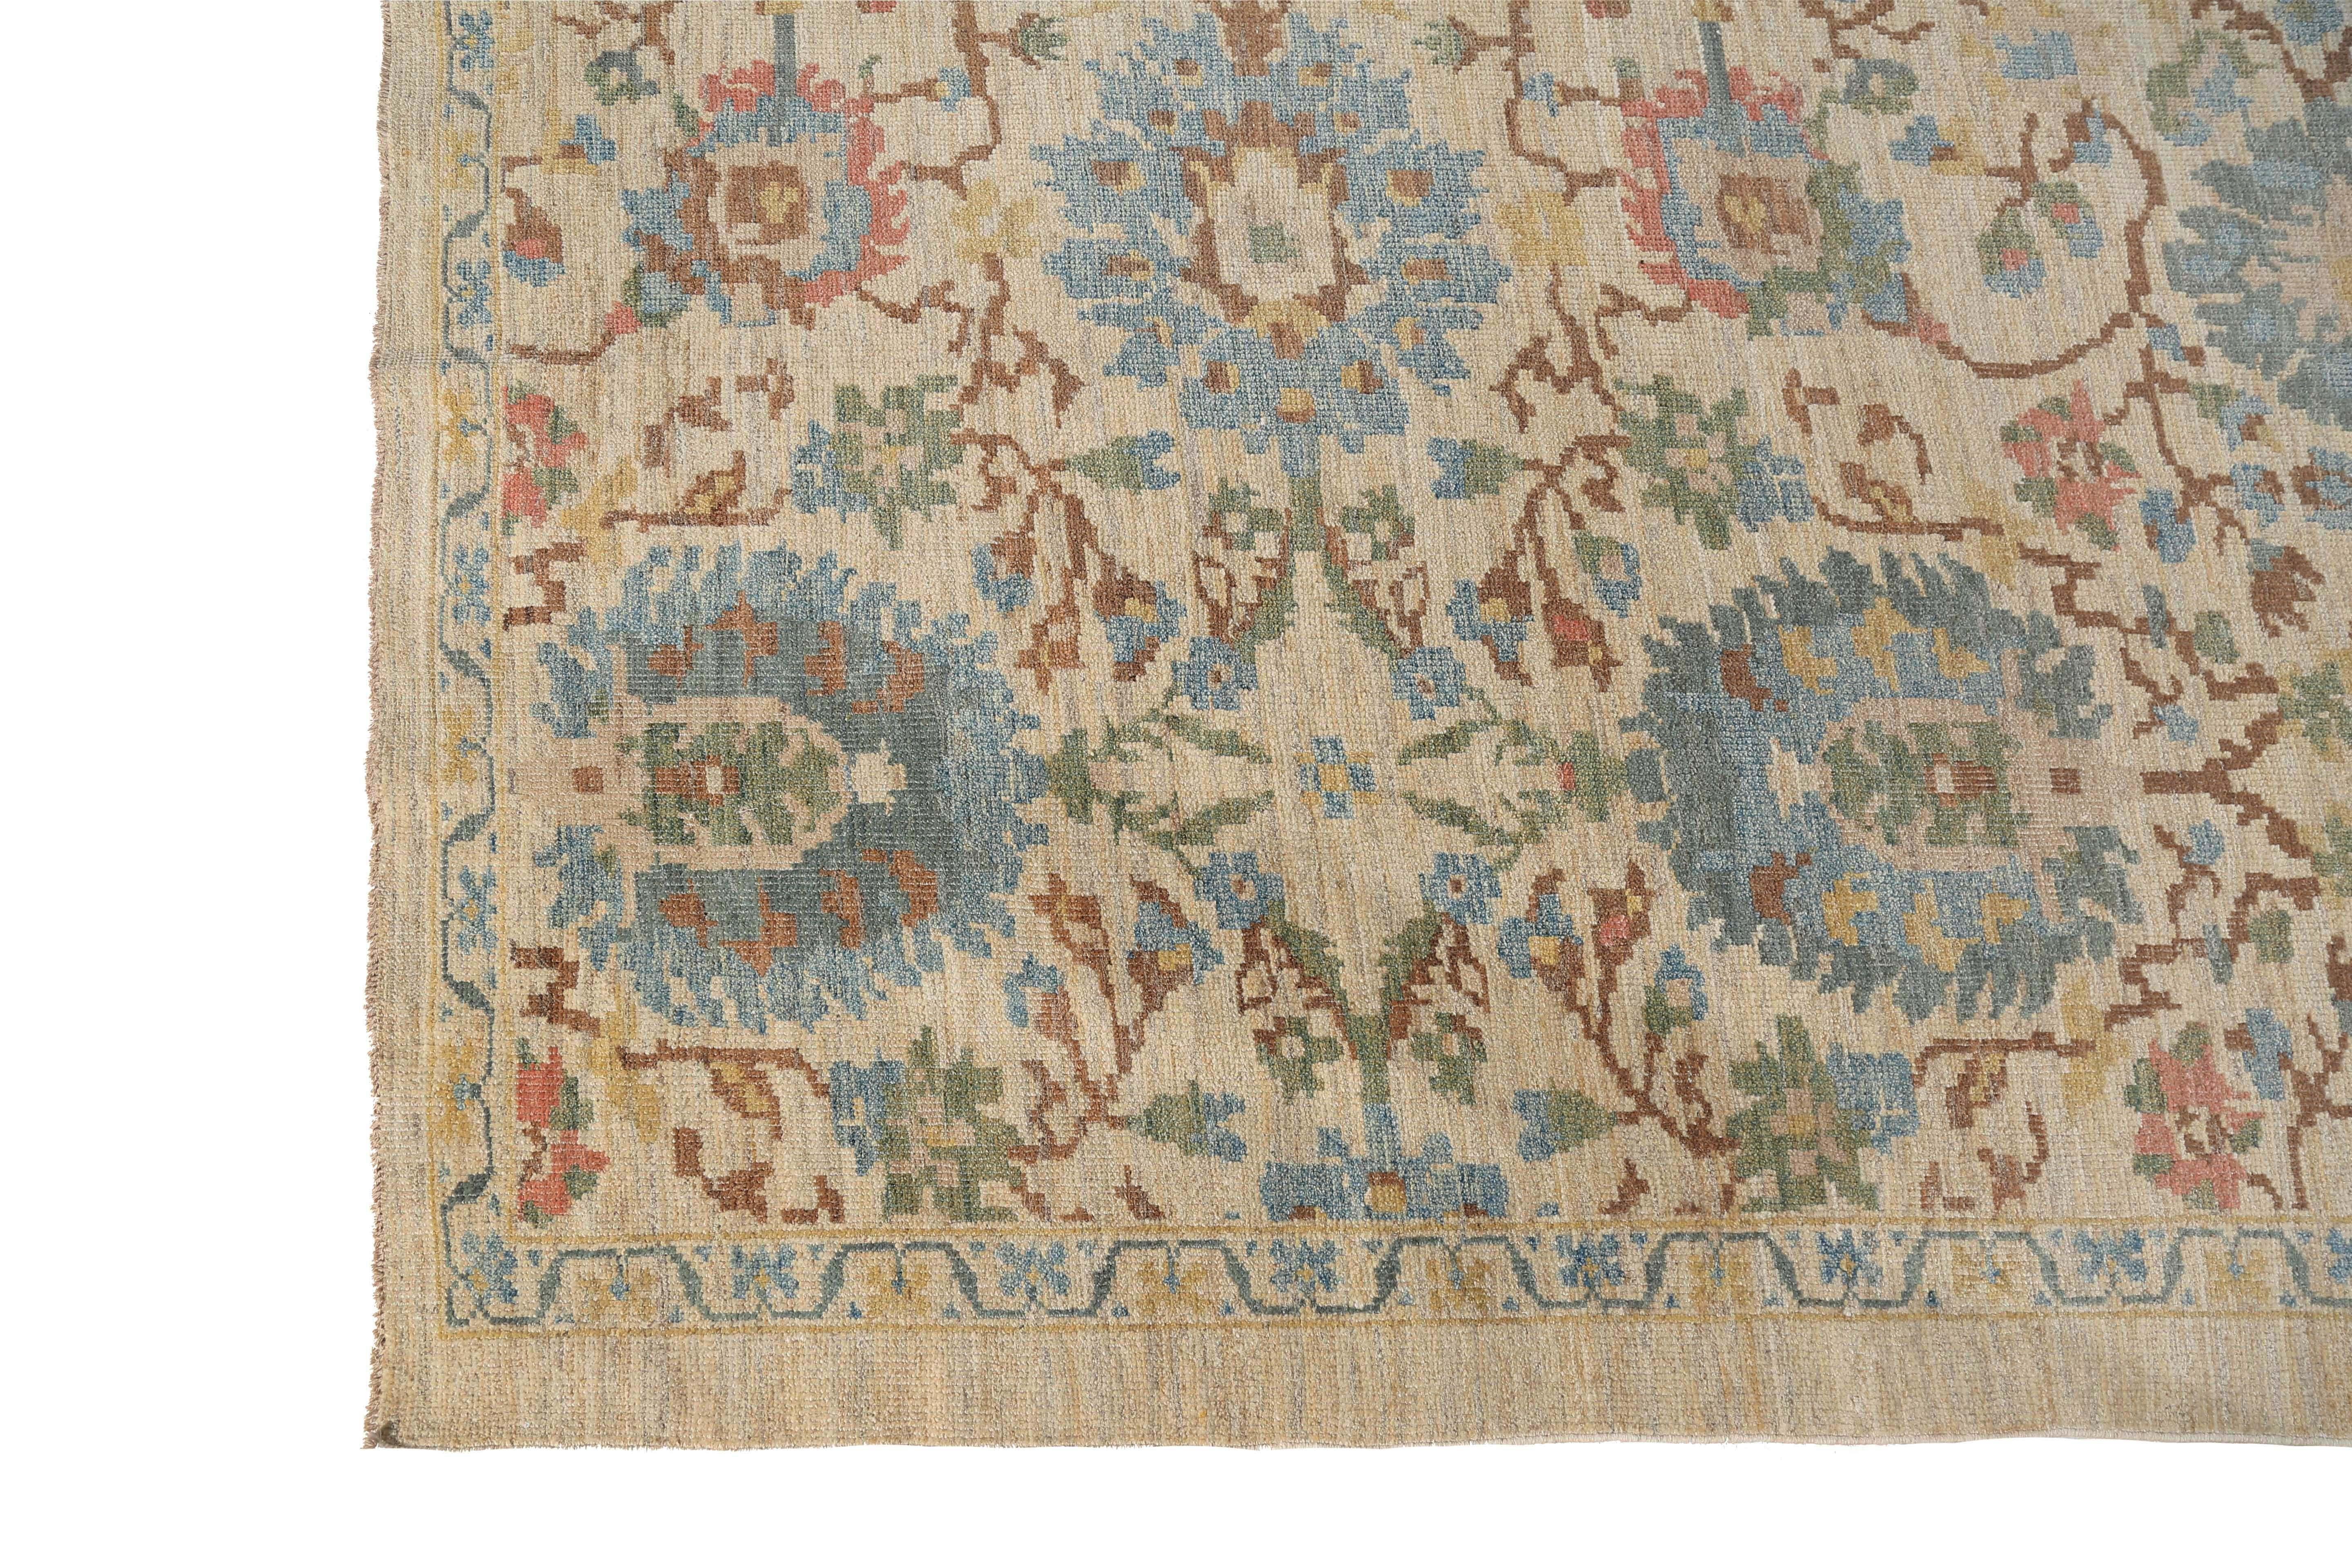 This handmade Turkish Sultanabad rug is a stunning addition to any home decor. Measuring at 8'1